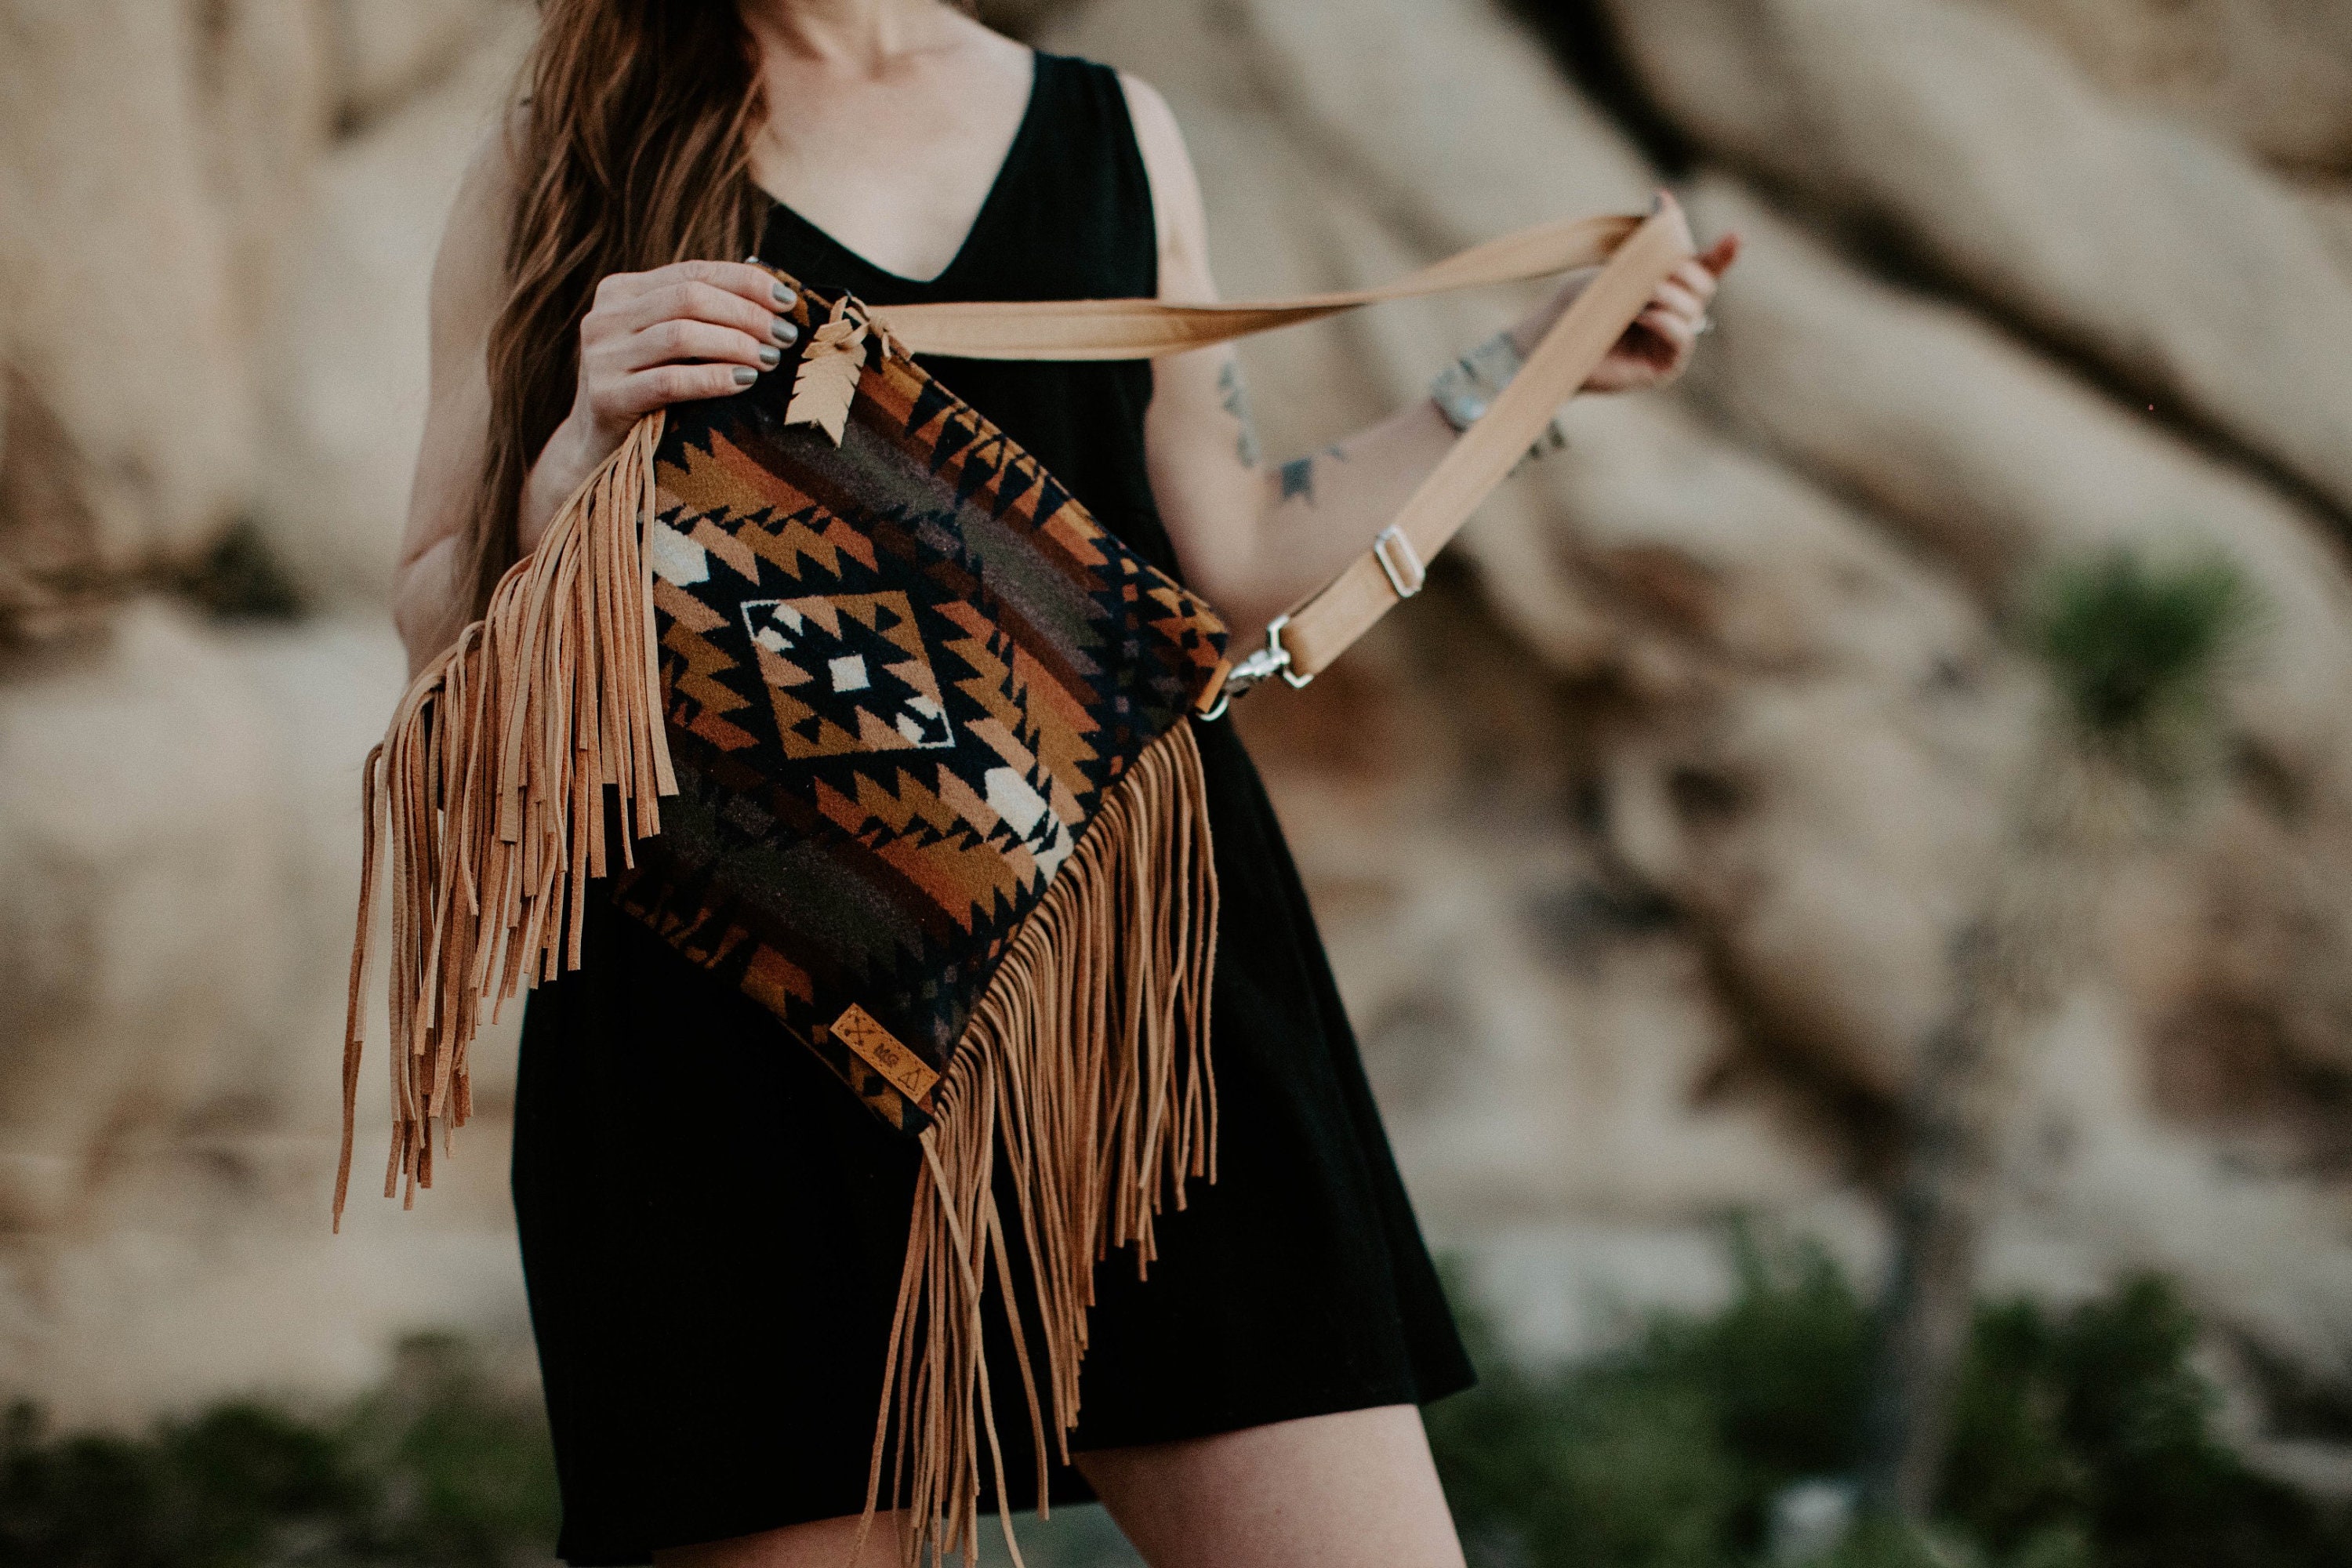 Evening Bags Whole Brown Cow Women039s Vegan Leather Hobo Fringe Crossbody Tassel  Purse Lady Vintage Small Handbag Cute For3983271 From C6kd, $16.26 |  DHgate.Com